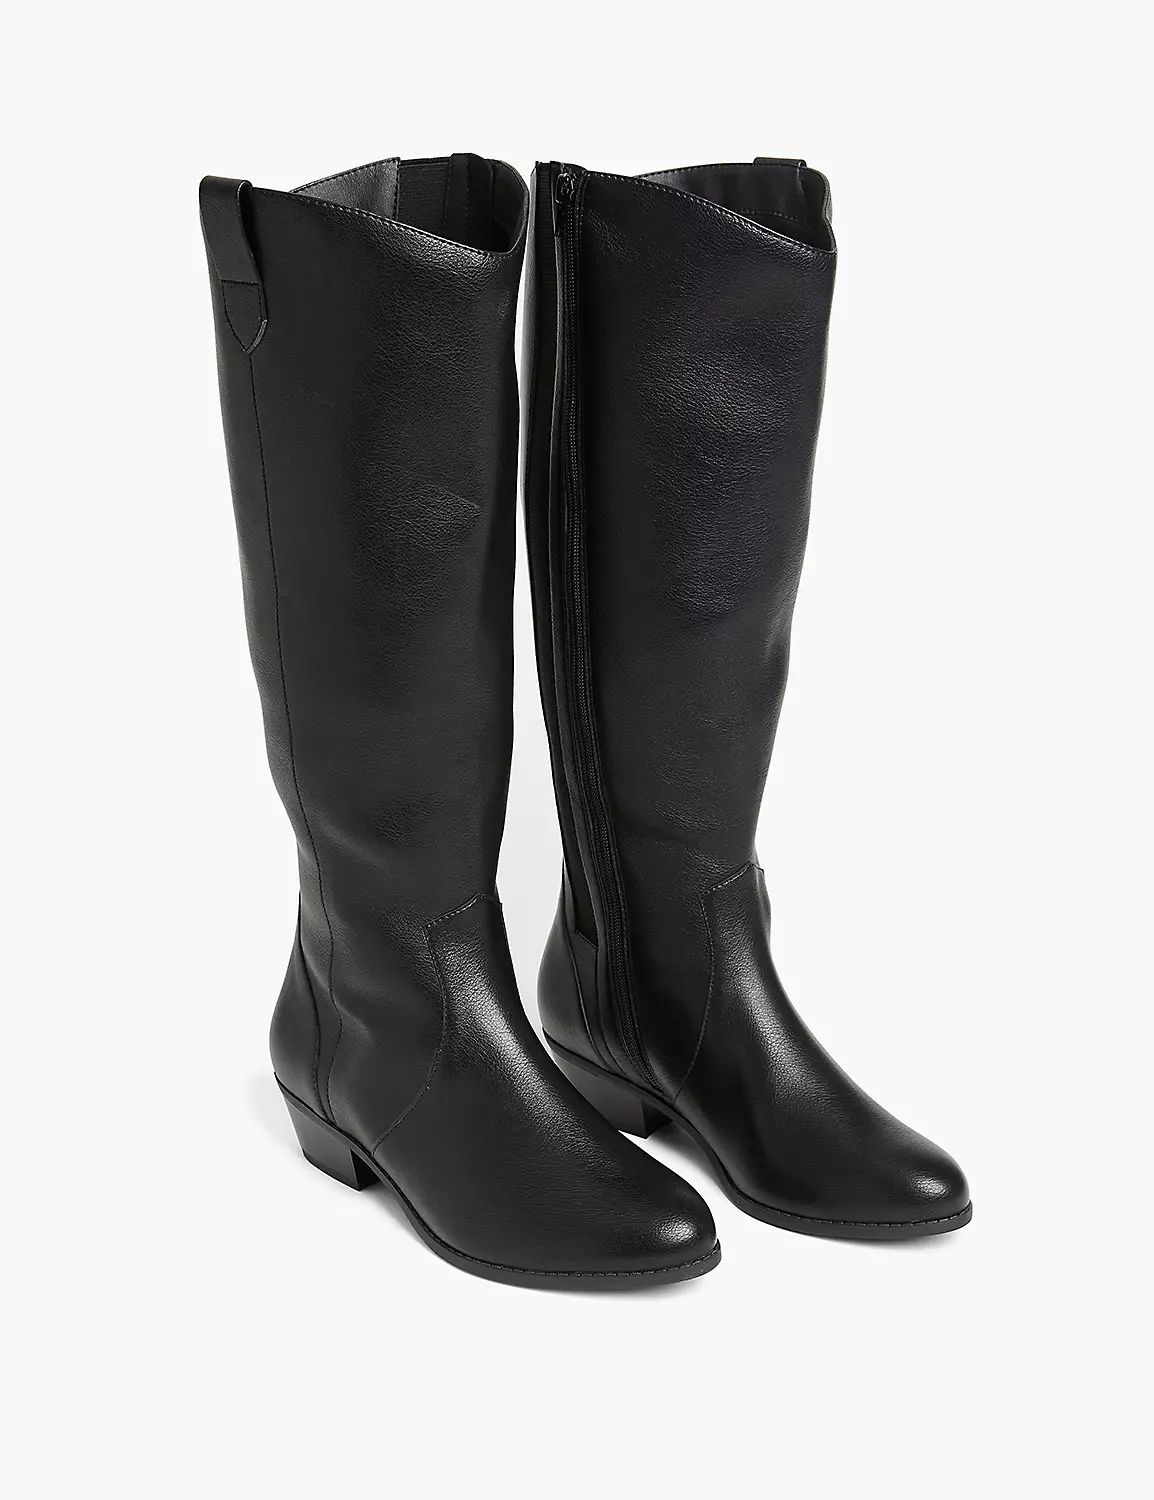 Dream Cloud Faux-Leather Western Tall Boot | LaneBryant | Lane Bryant (US)